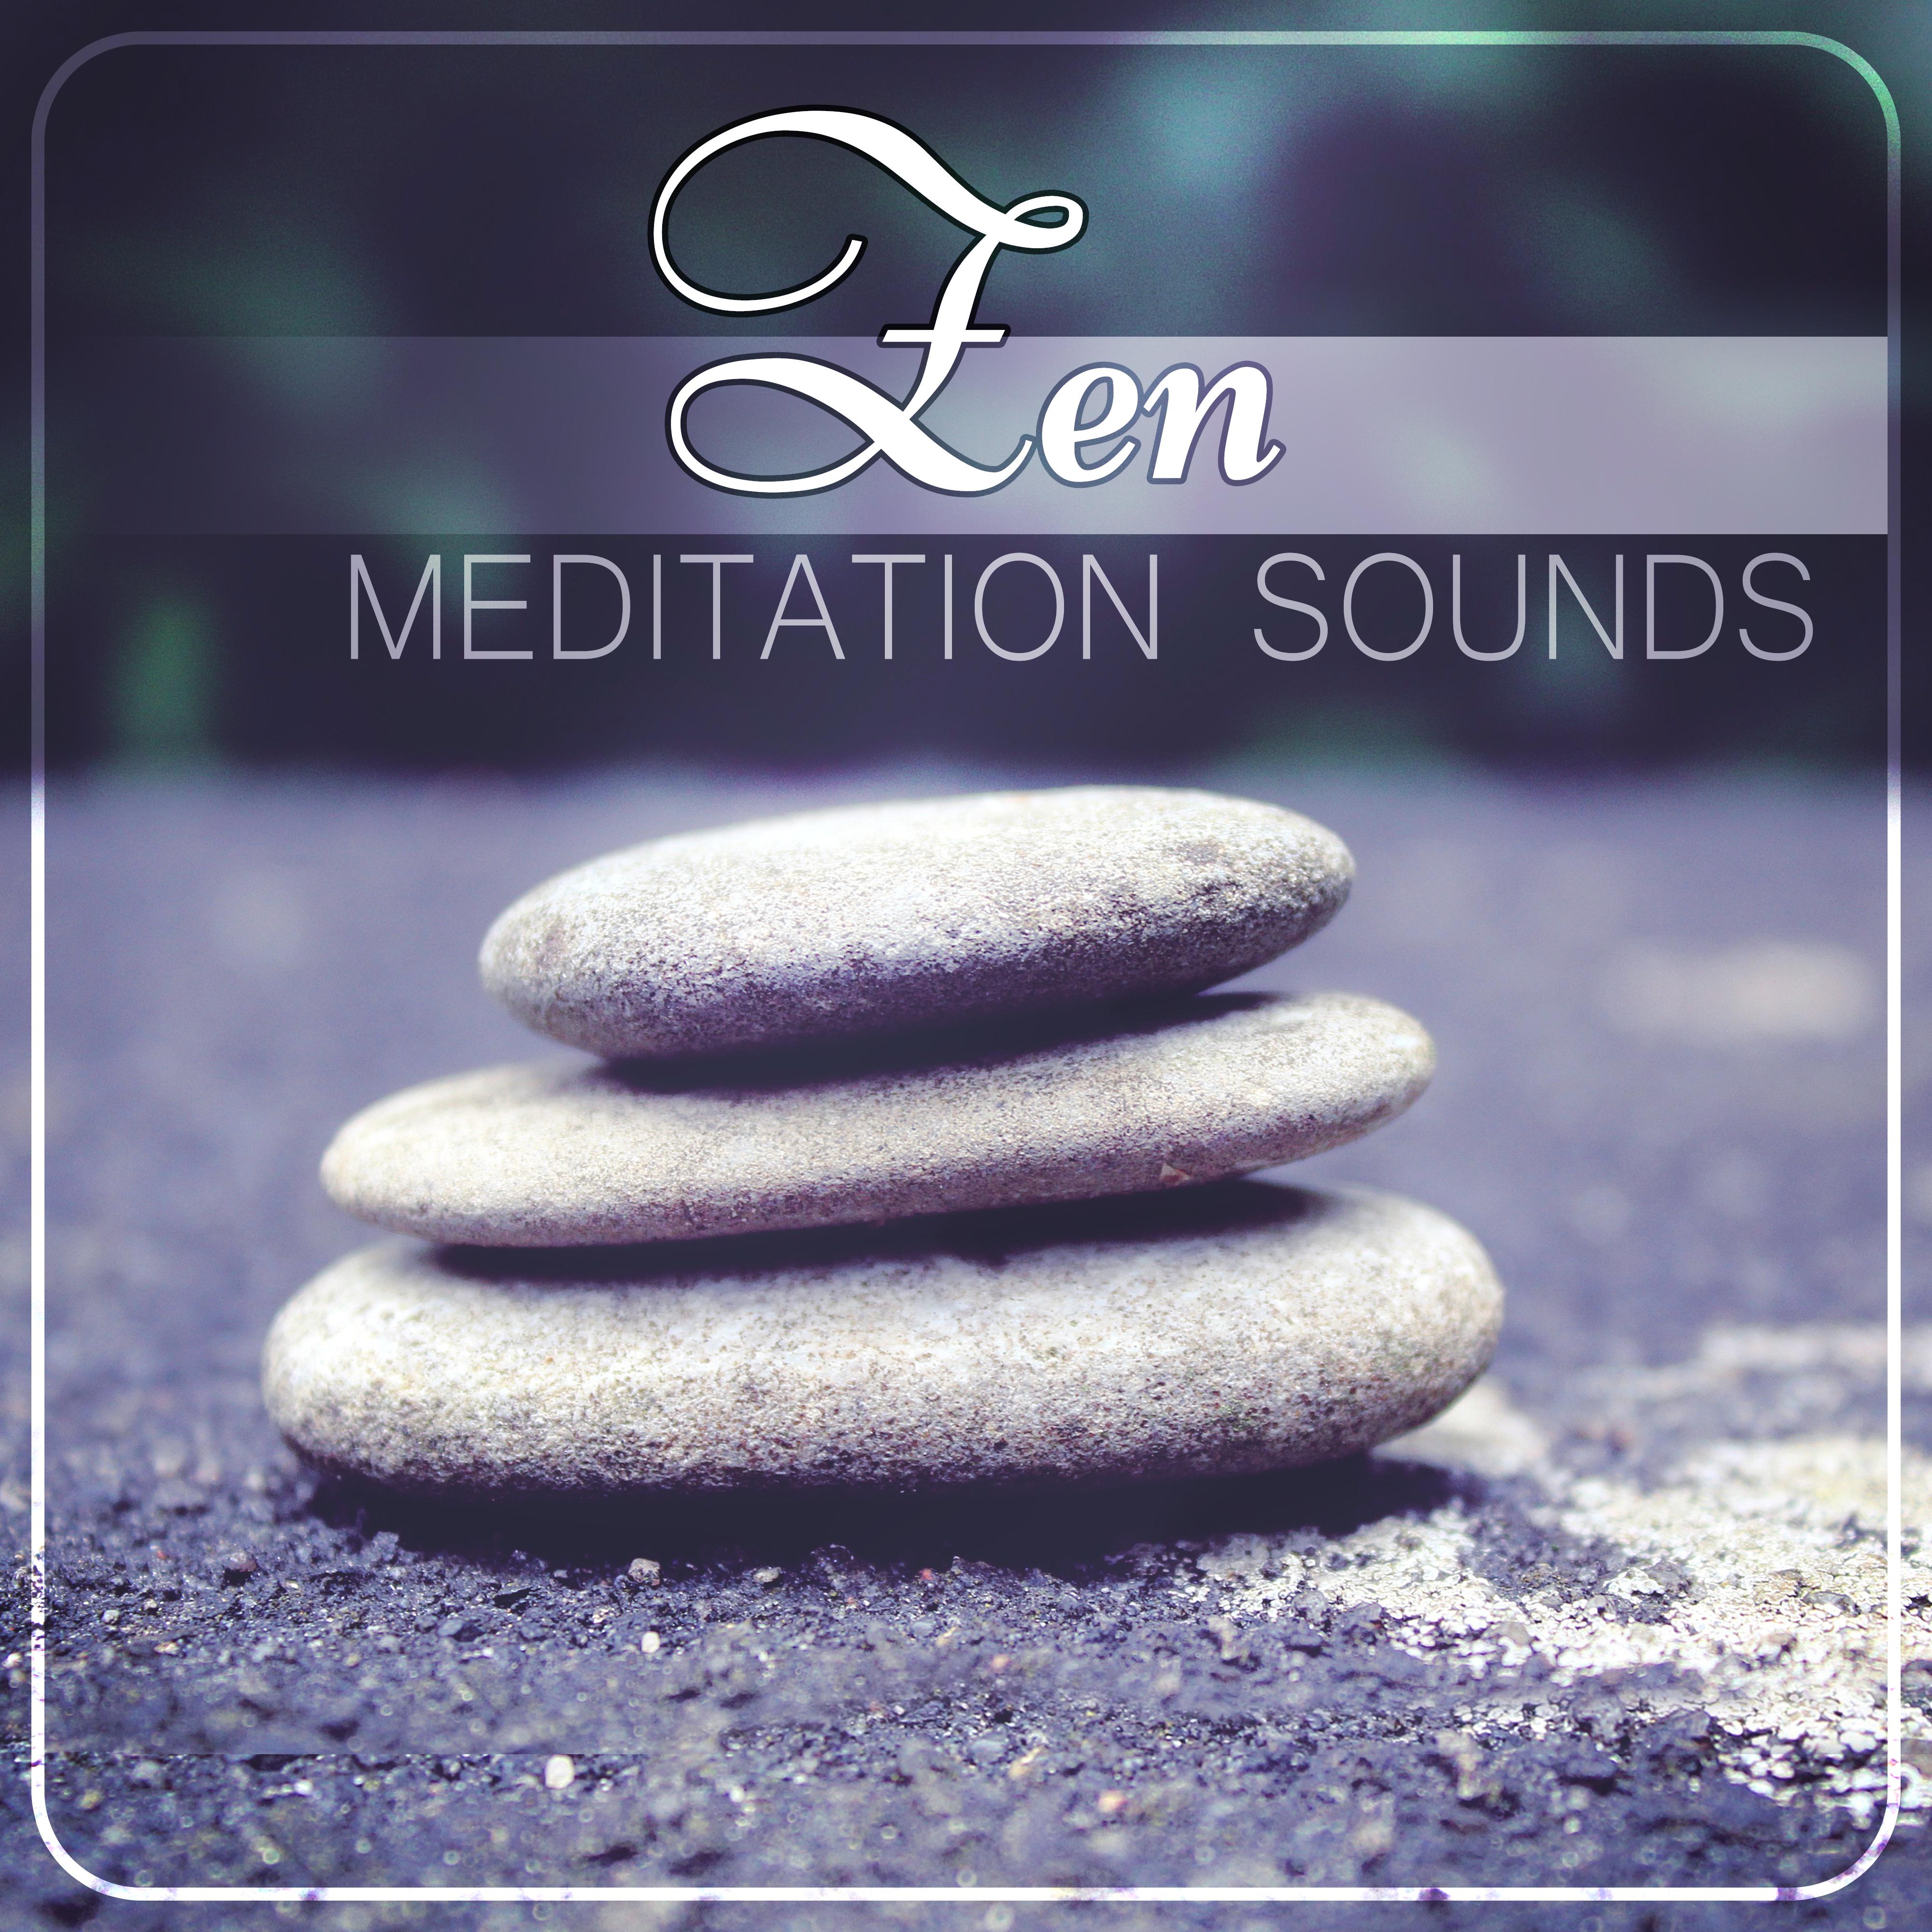 Zen Meditation Sounds - Harmony of Senses, Pure Nature Sounds for Stress Relief, Massage Music